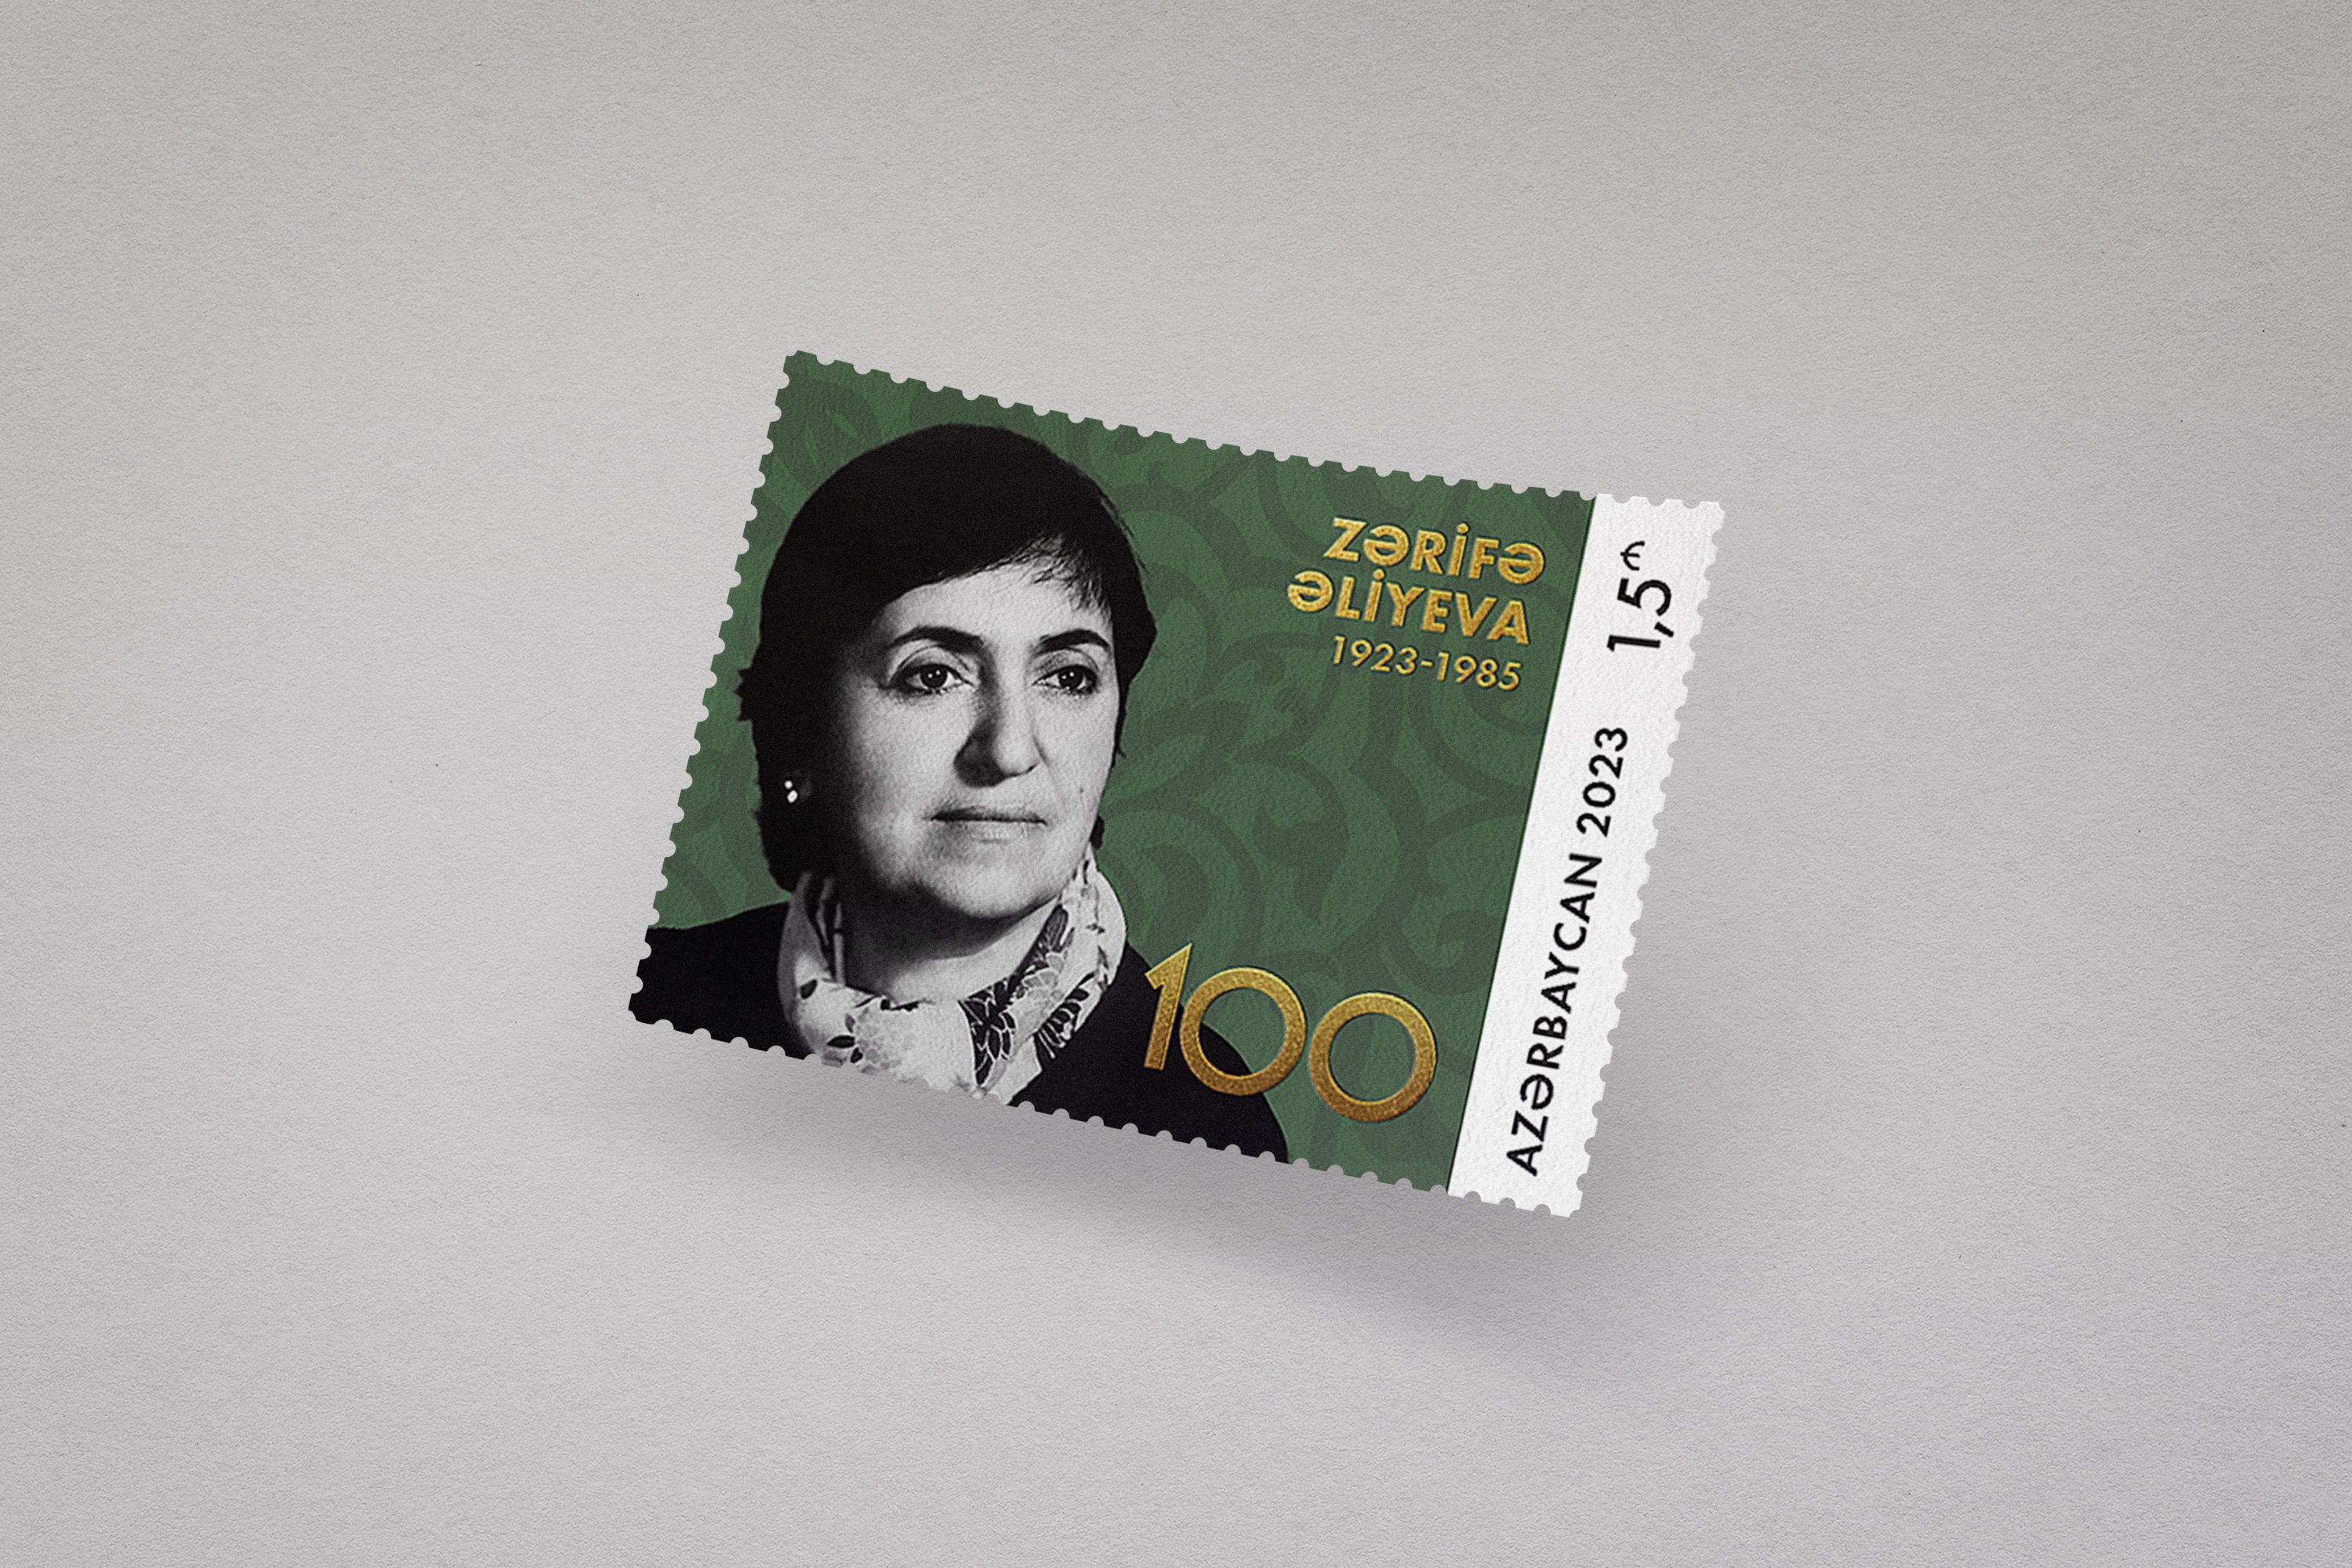 A postage stamp was put into circulation on the occasion of the 100th anniversary of Academician Zarifa Aliyeva